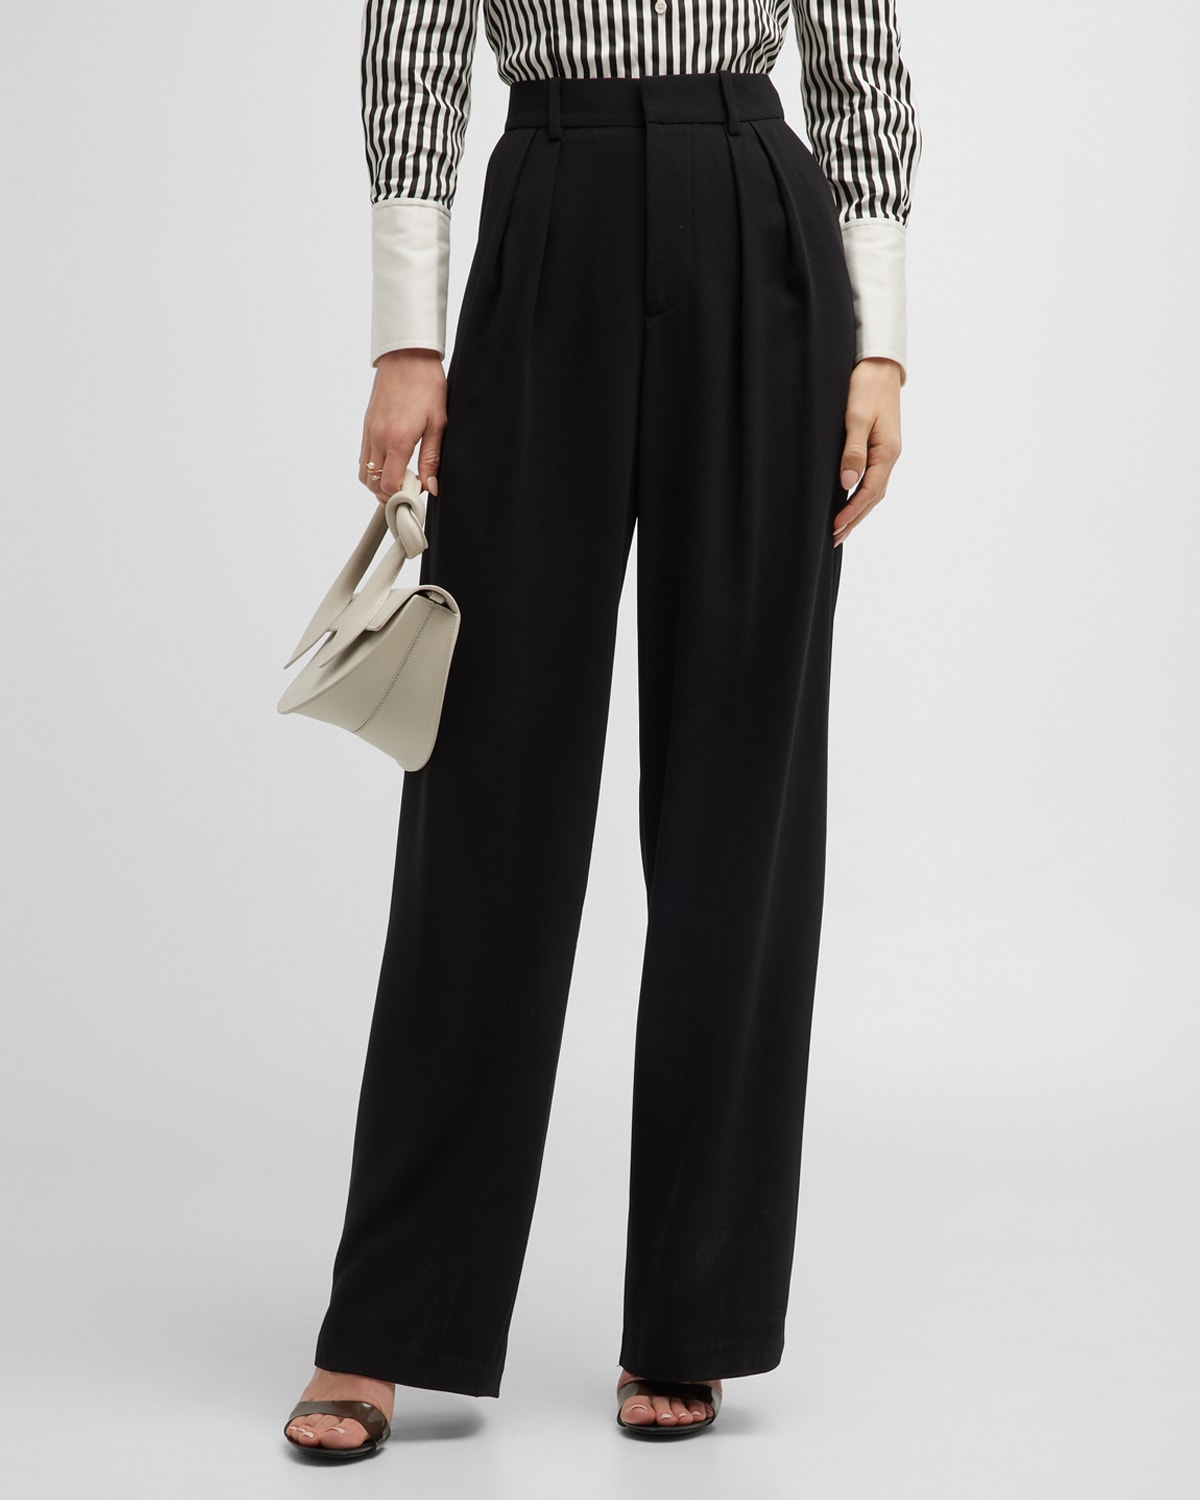 Alice + Olivia Pompey Vegan Leather High-Waist Pleated Trousers ...